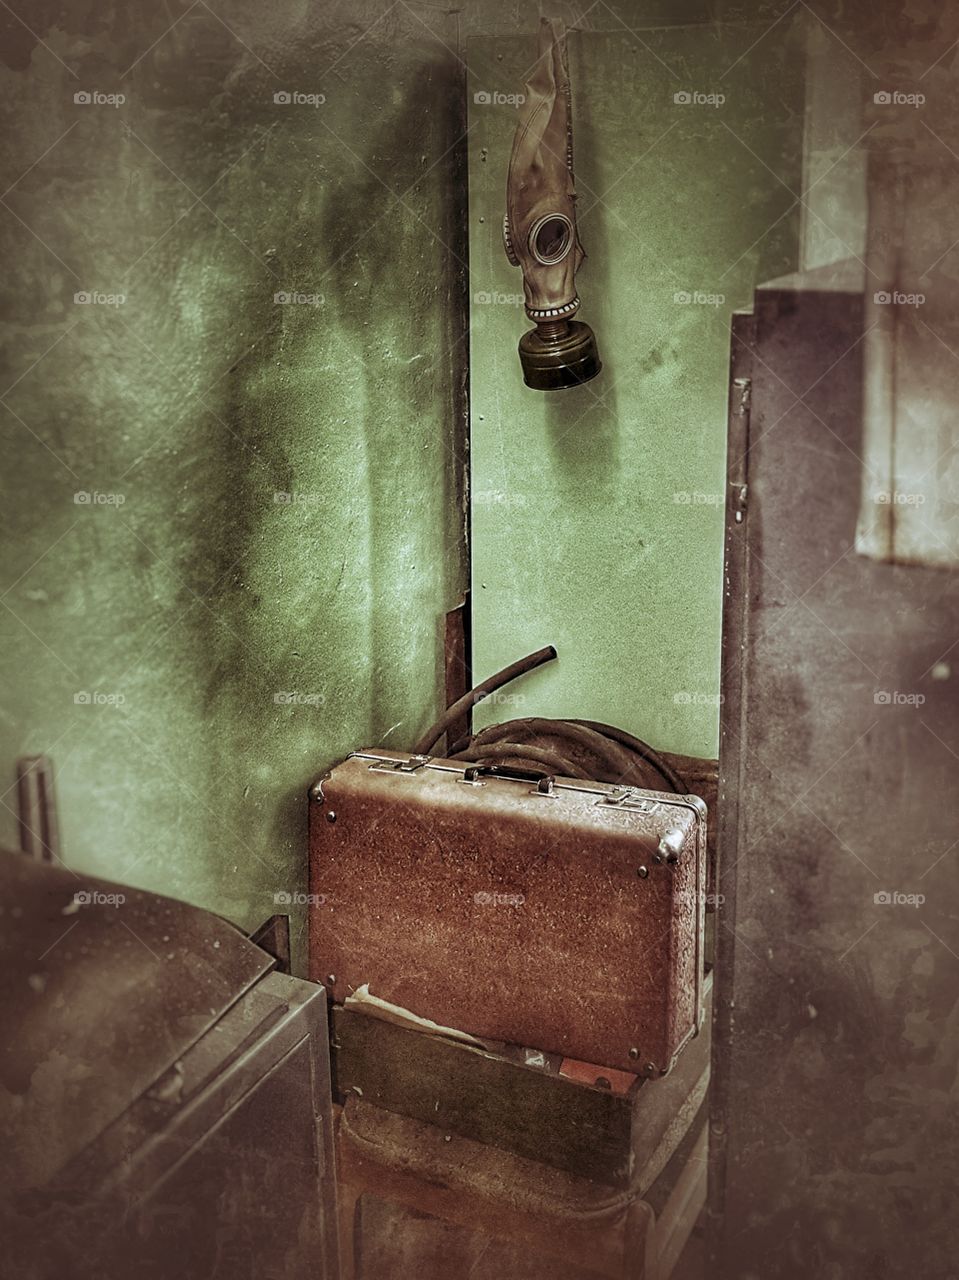 A gas mask weighs over an old suitcase in a room without windows.